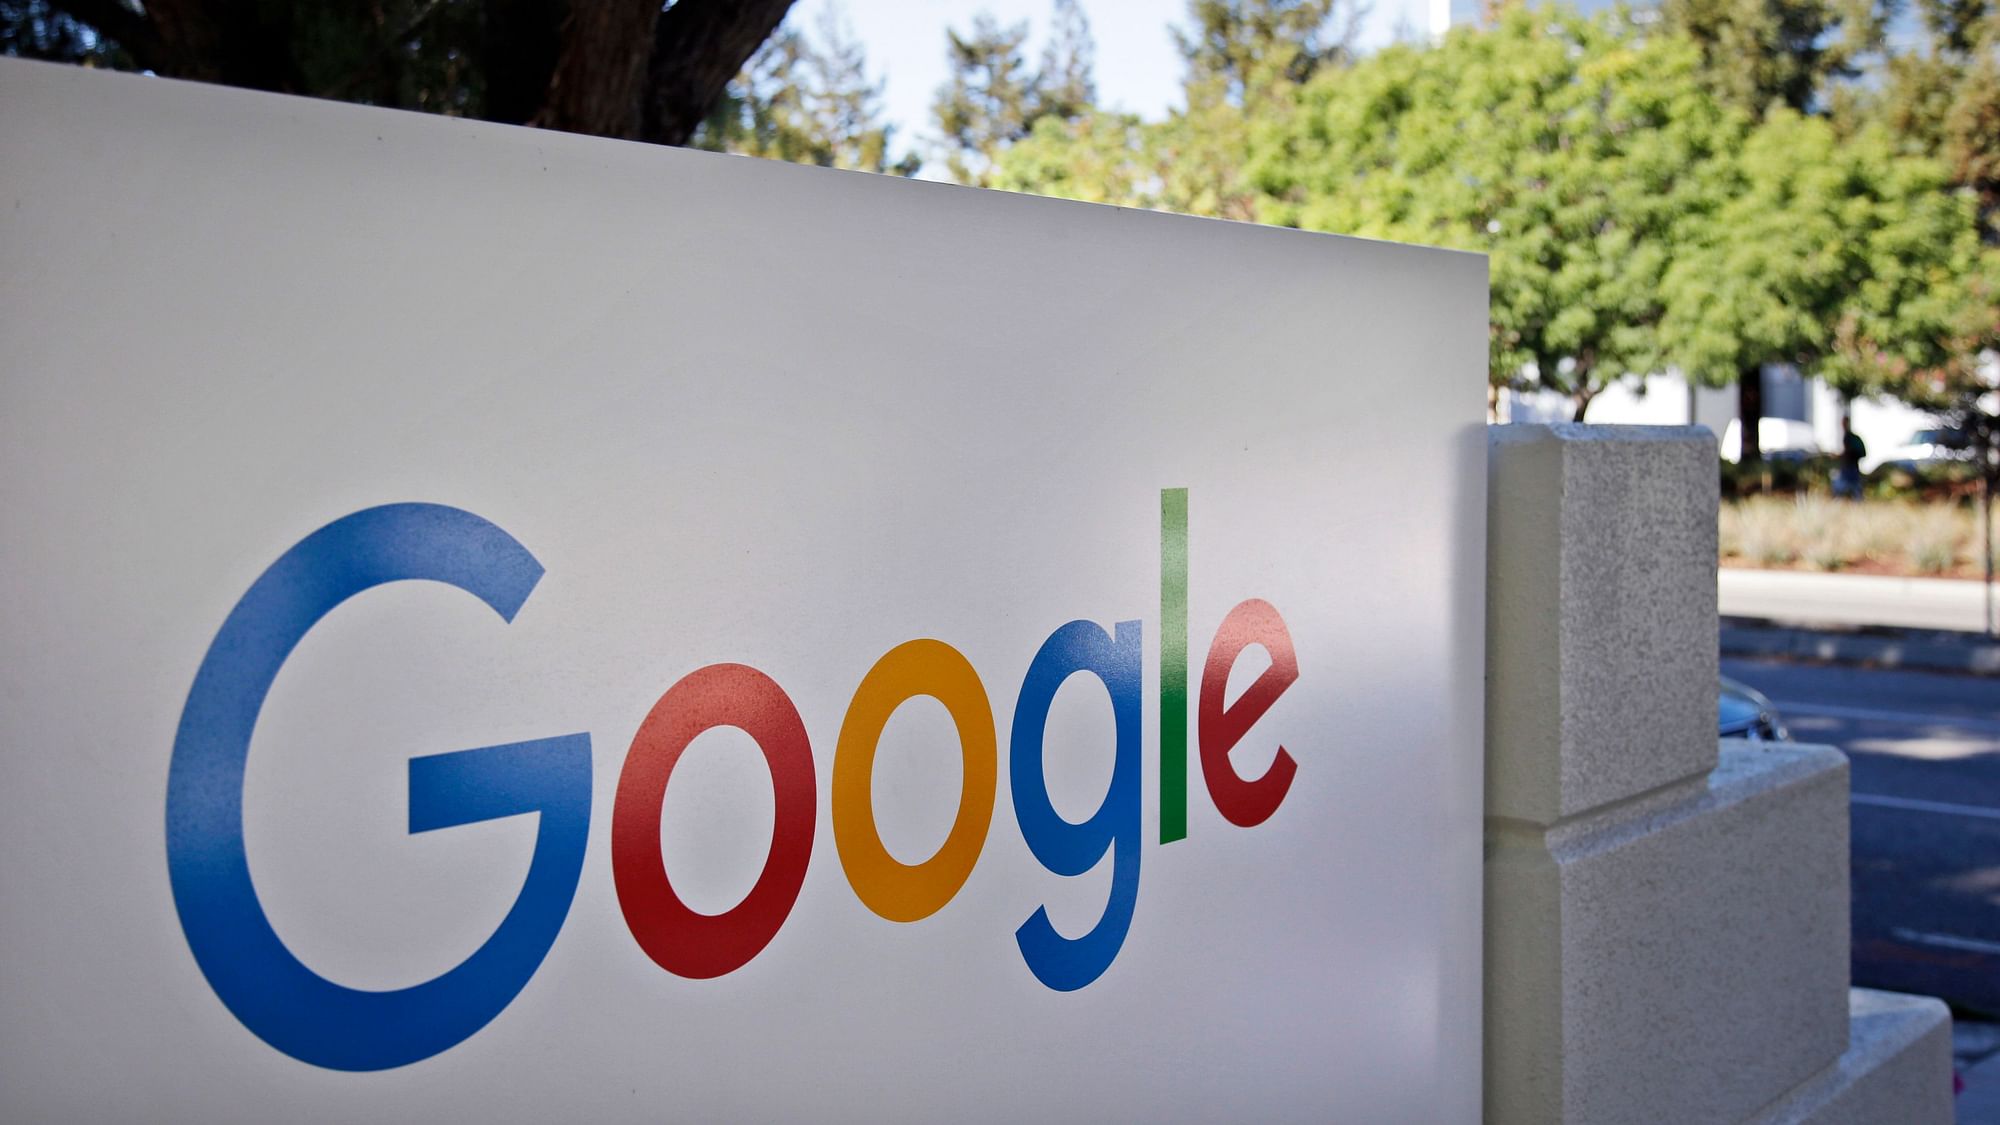 Google is ramping up its cloud efforts in India.